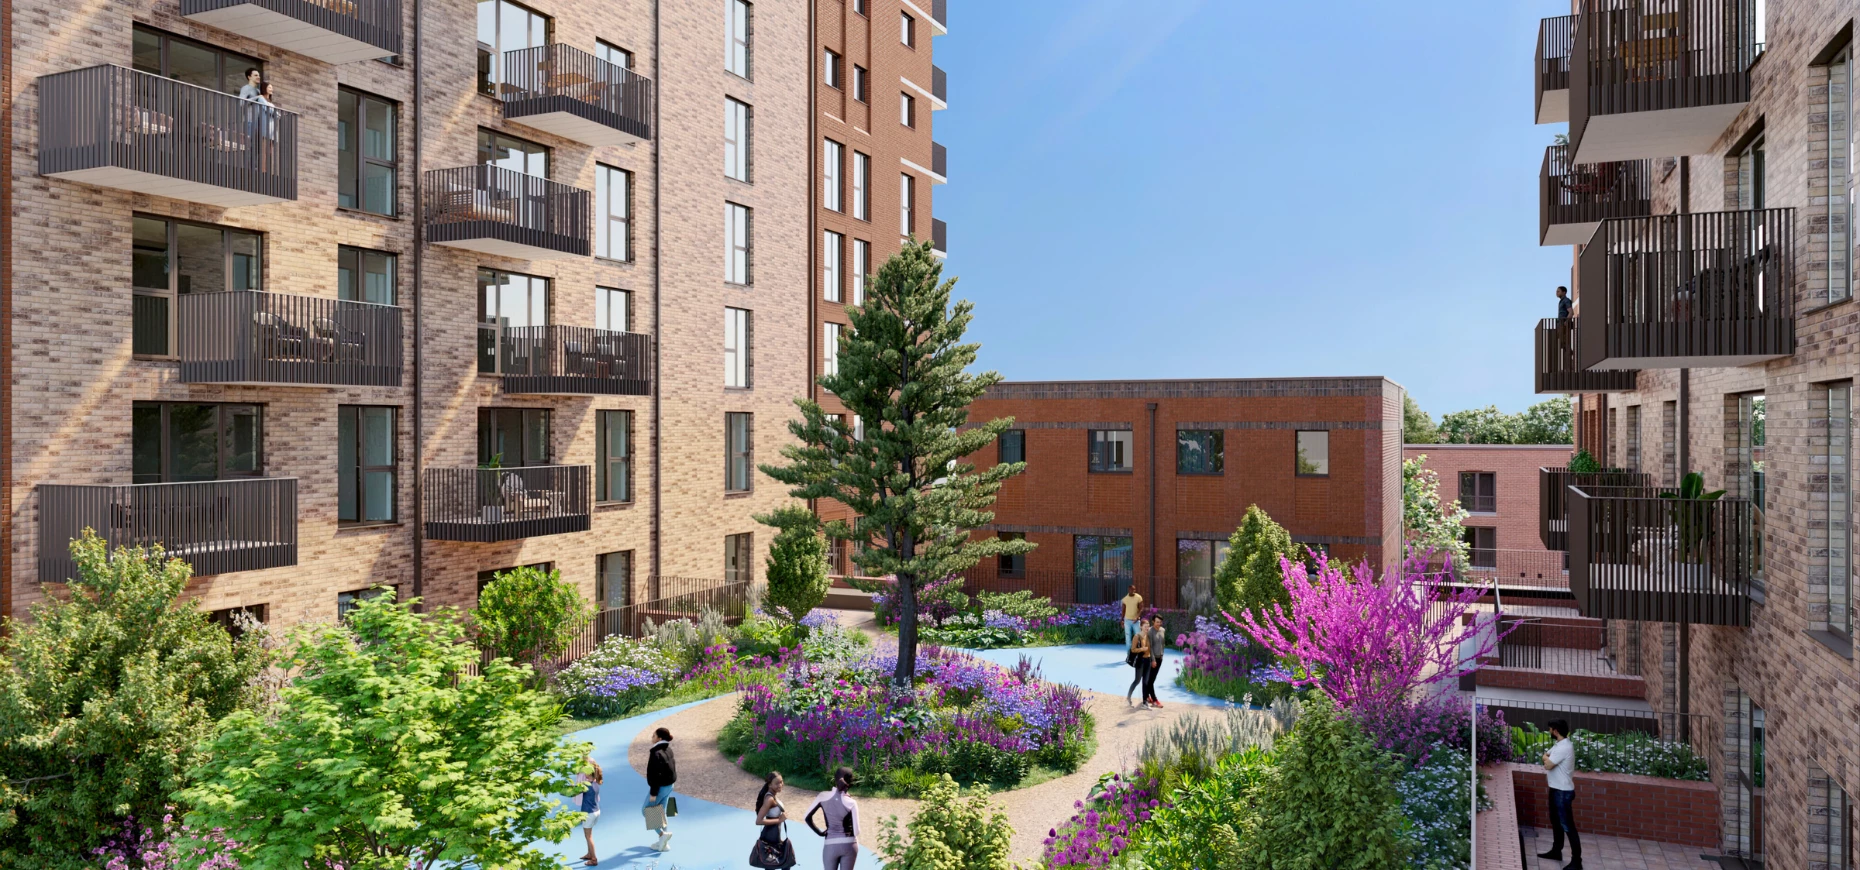 A CGI render of the new Heybourne Park development in London.